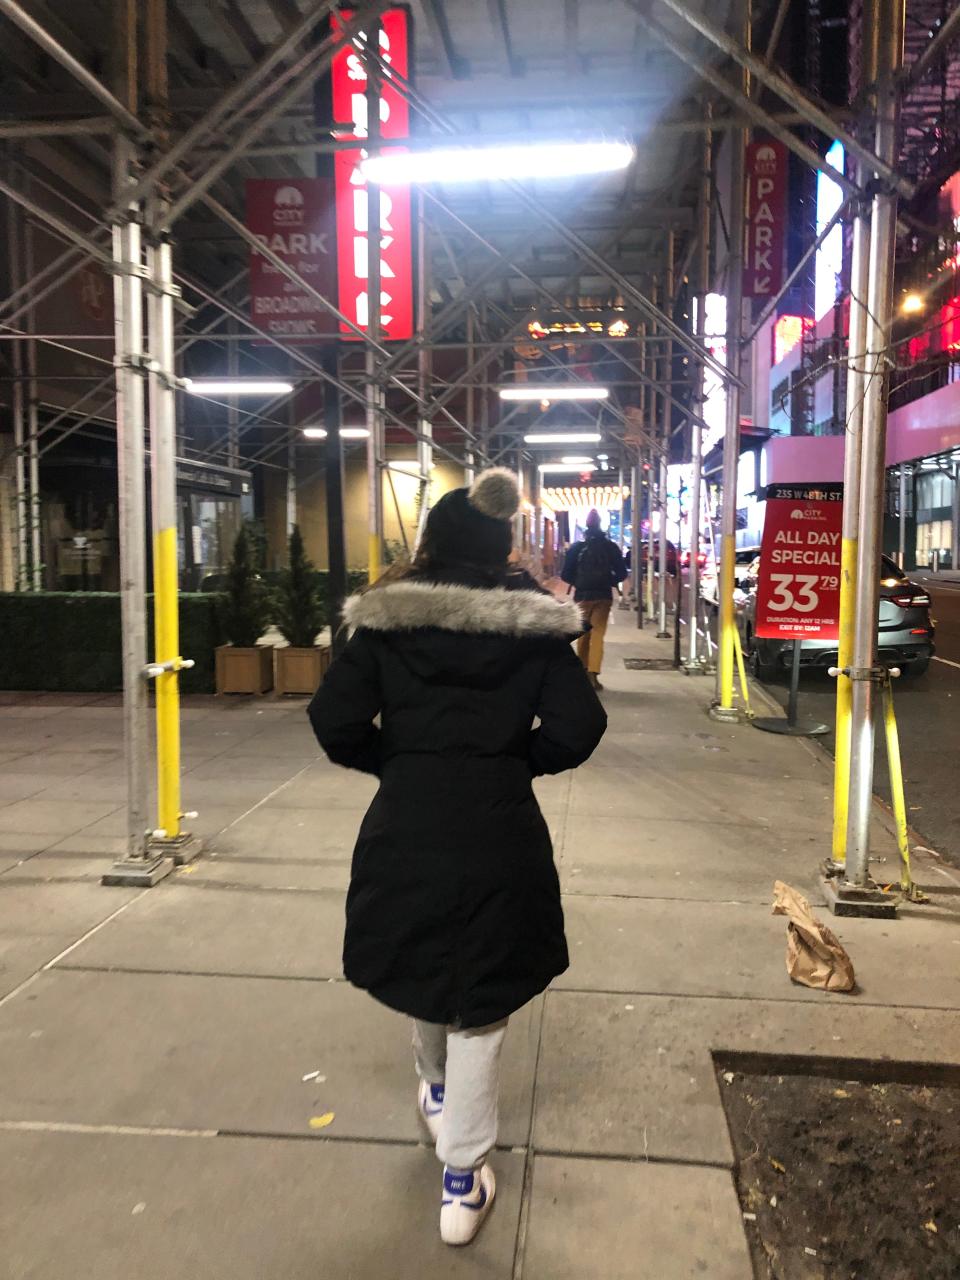 Instead of leading the way the entire trip, our family allowed our 14-year-old daughter a chance to navigate the streets of New York City by herself.